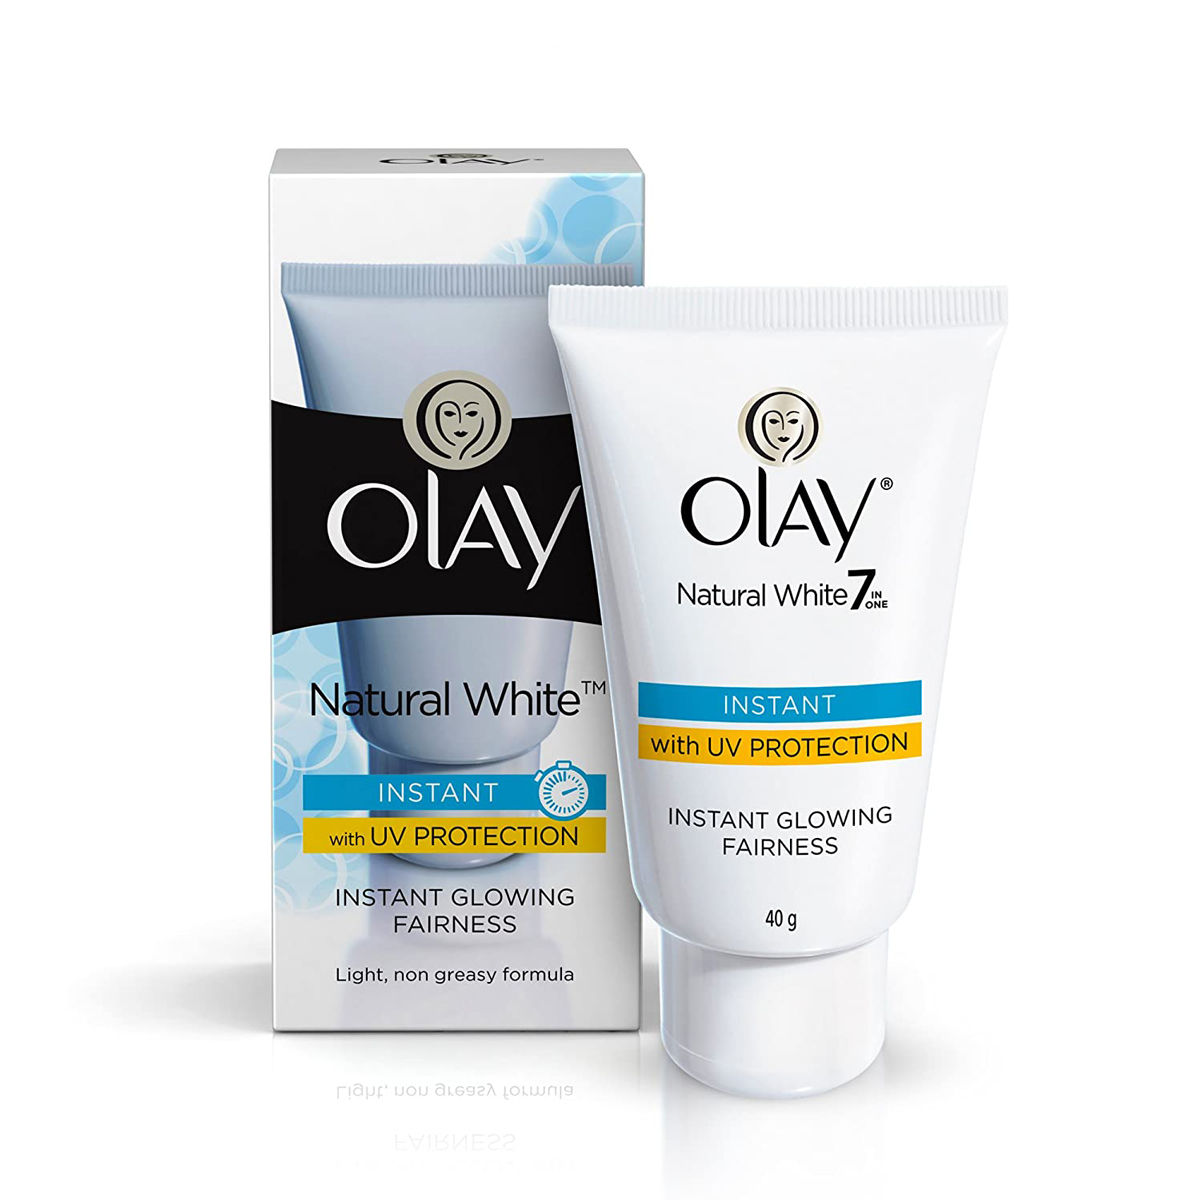 Olay Natural White Instant Glowing Fairness Cream, 40 gm, Pack of 1 